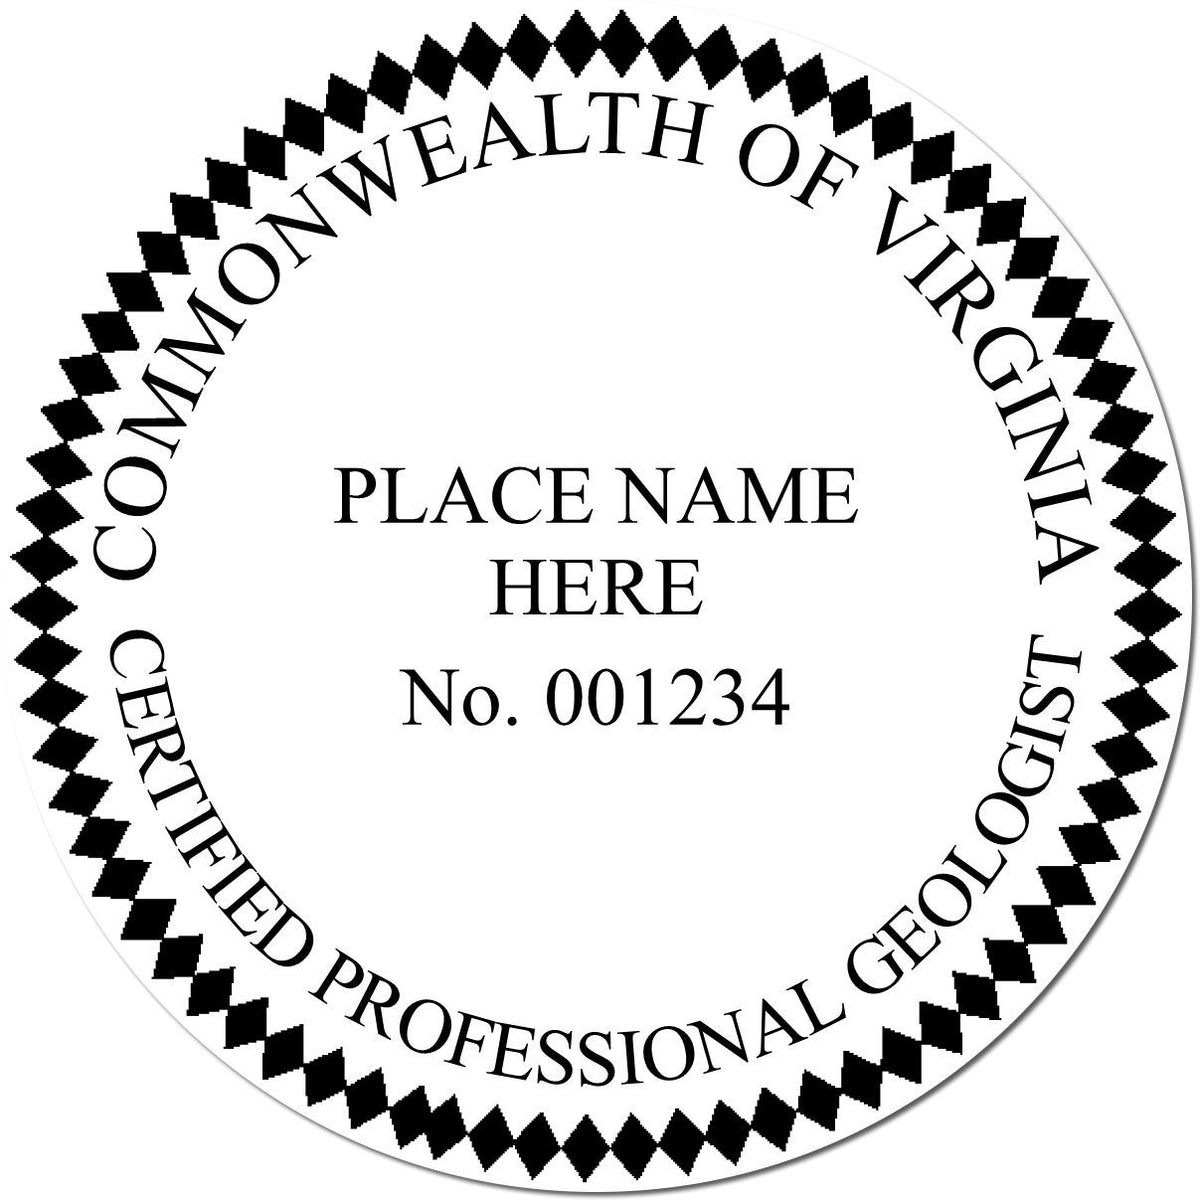 This paper is stamped with a sample imprint of the Digital Virginia Geologist Stamp, Electronic Seal for Virginia Geologist, signifying its quality and reliability.